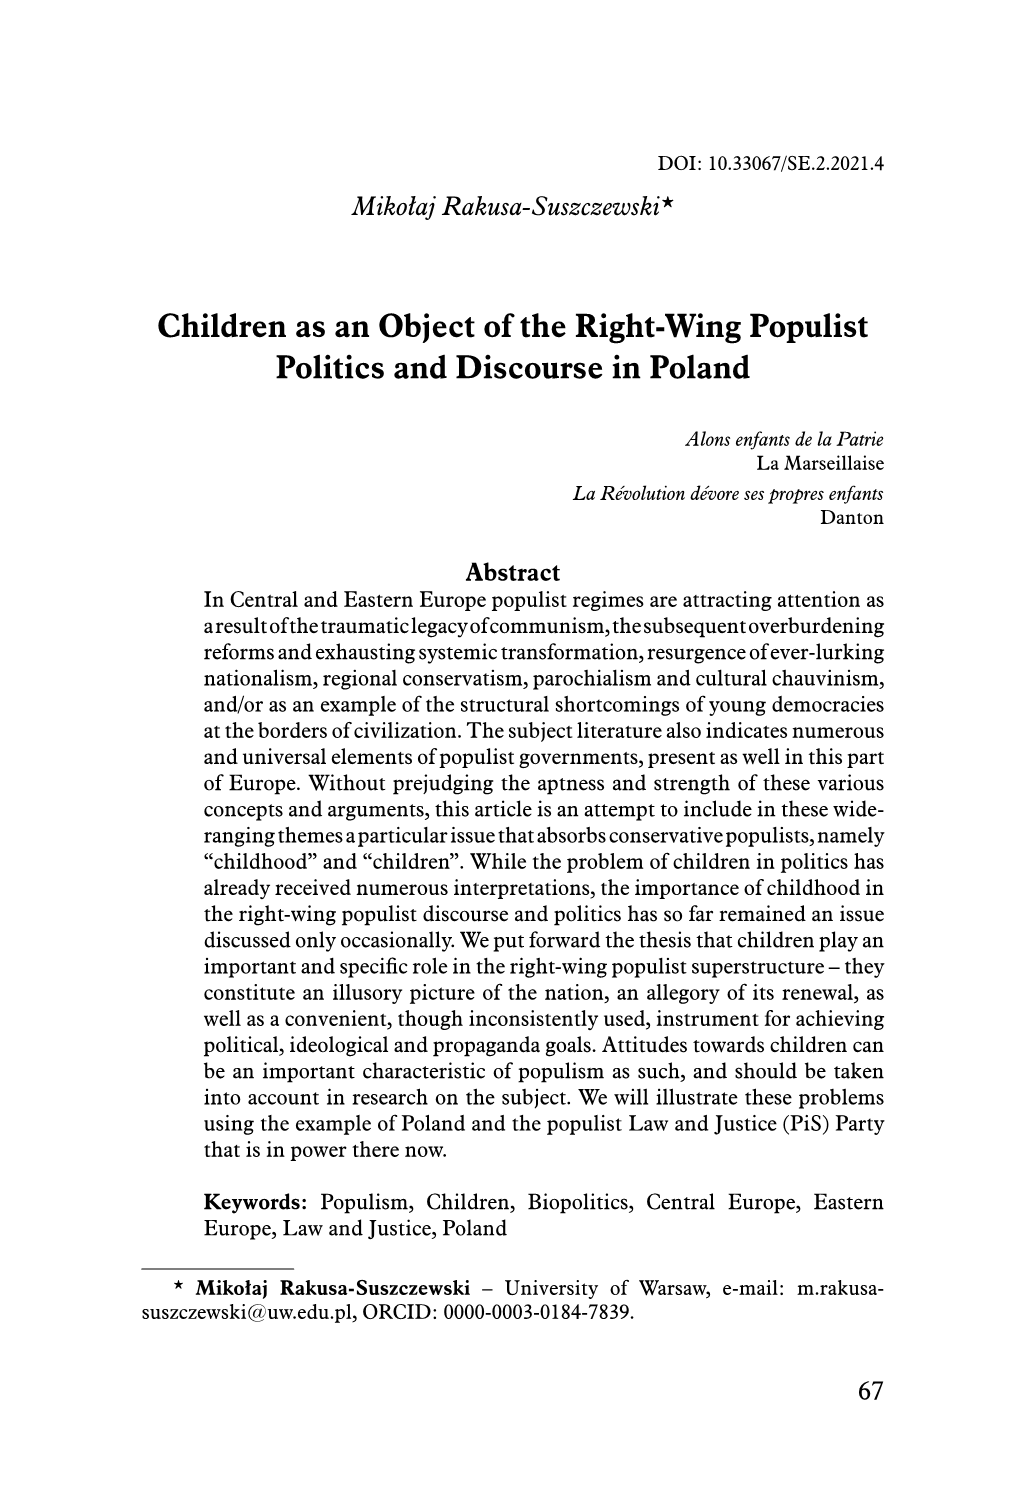 Children As an Object of the Right-Wing Populist Politics and Discourse in Poland